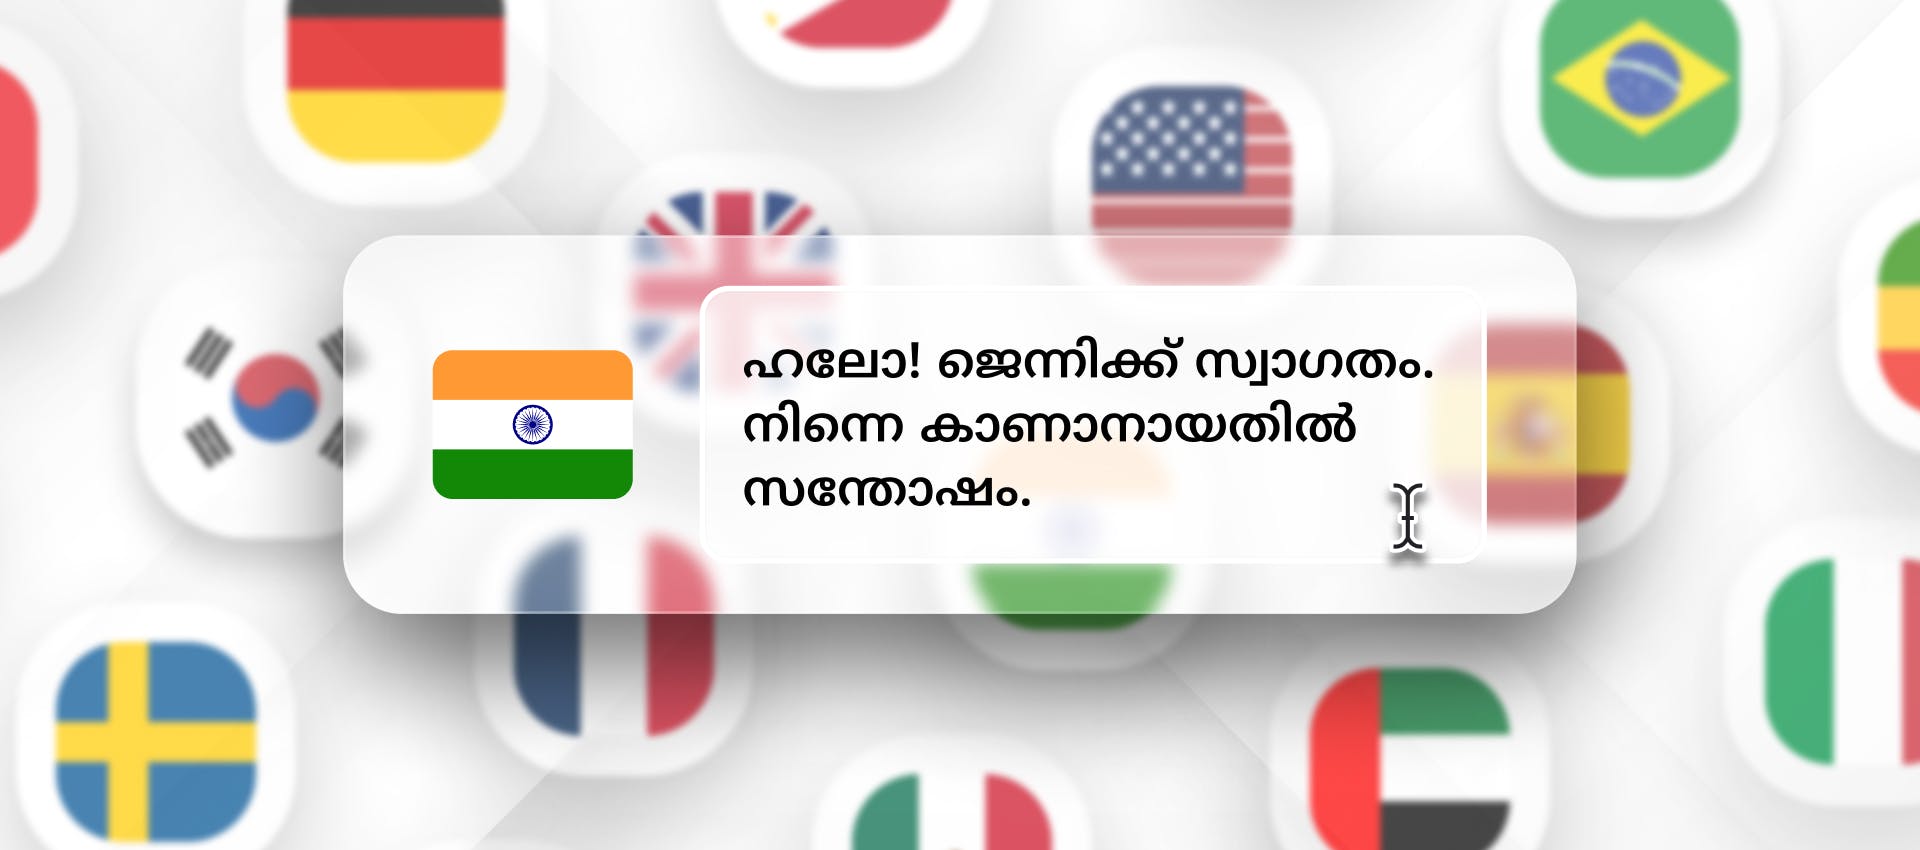 Malayalam phrase for TTS generation with different flags in the background